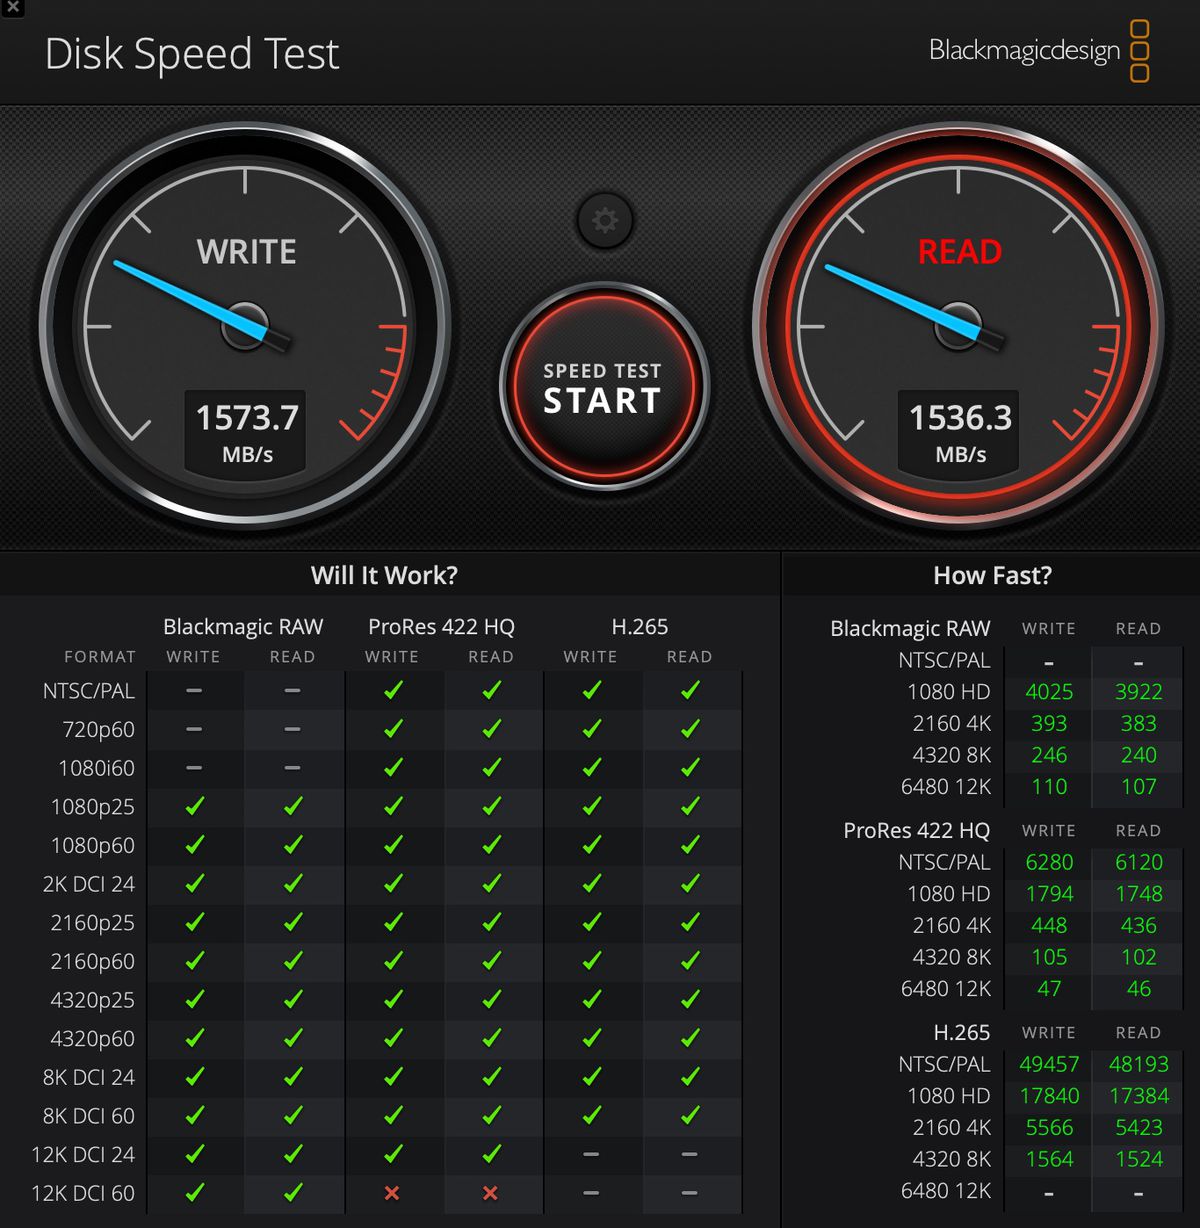 A screenshot of Blackmagic Disk Speed Test indicating scores of 1537.7 for Write and 1536.3 for Read.